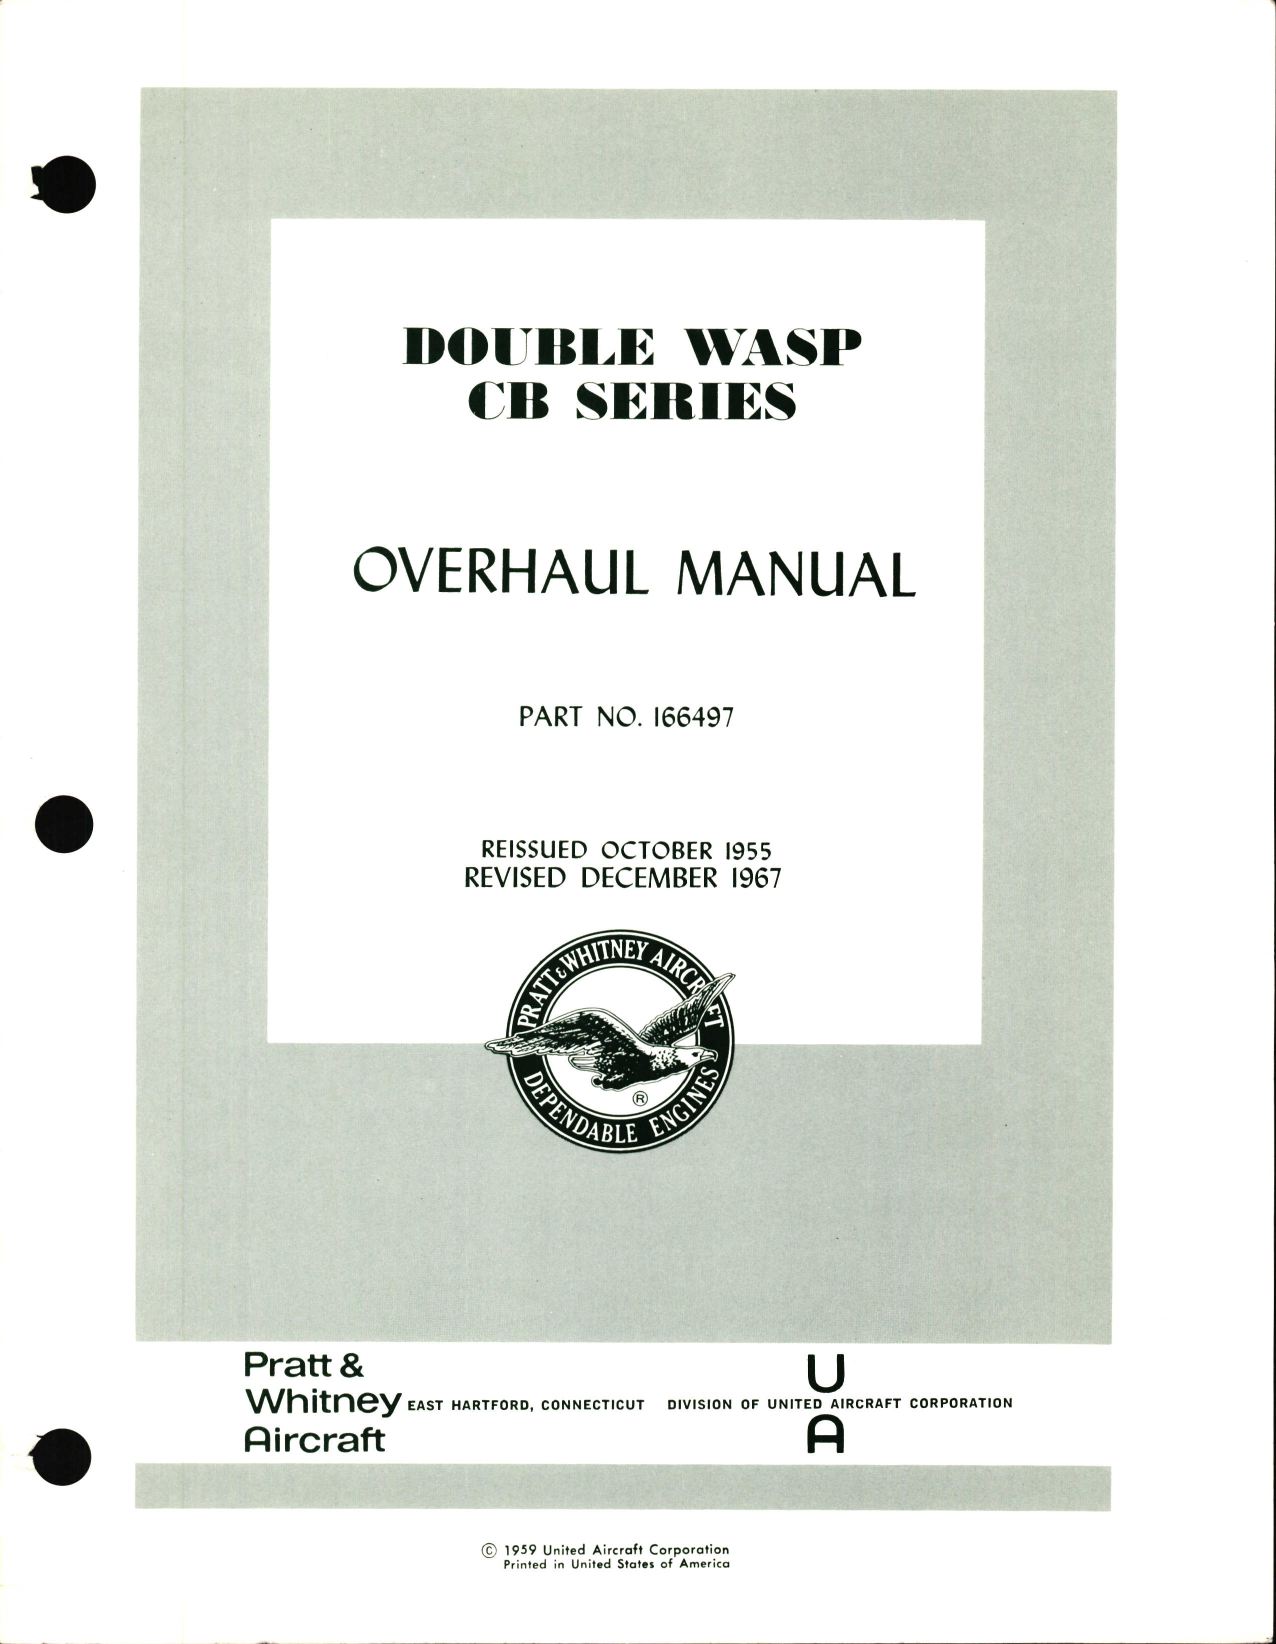 Sample page 5 from AirCorps Library document: Overhaul Manual for Double Wasp CB Series